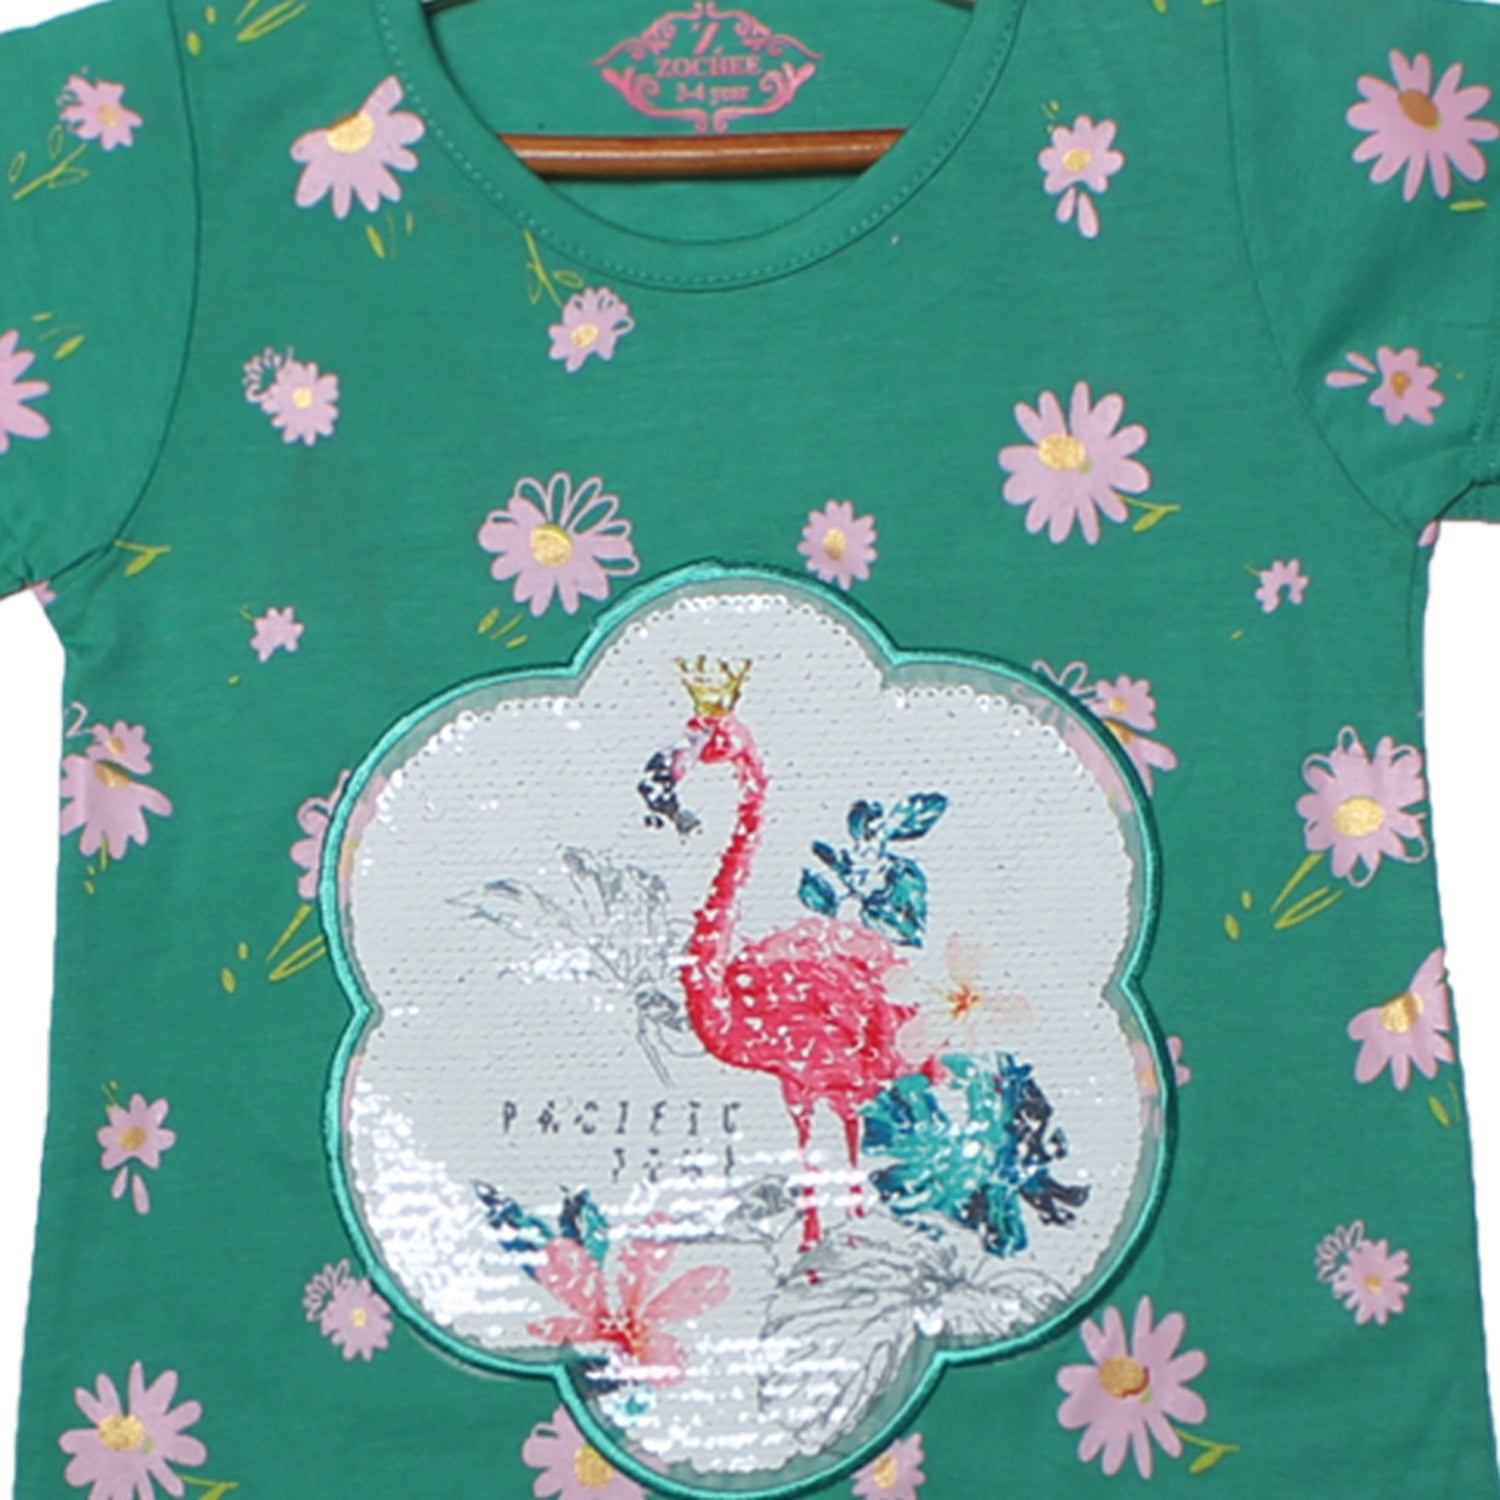 NEW GREEN FLOWER PATCH PRINTED T-SHIRT TOP FOR GIRLS